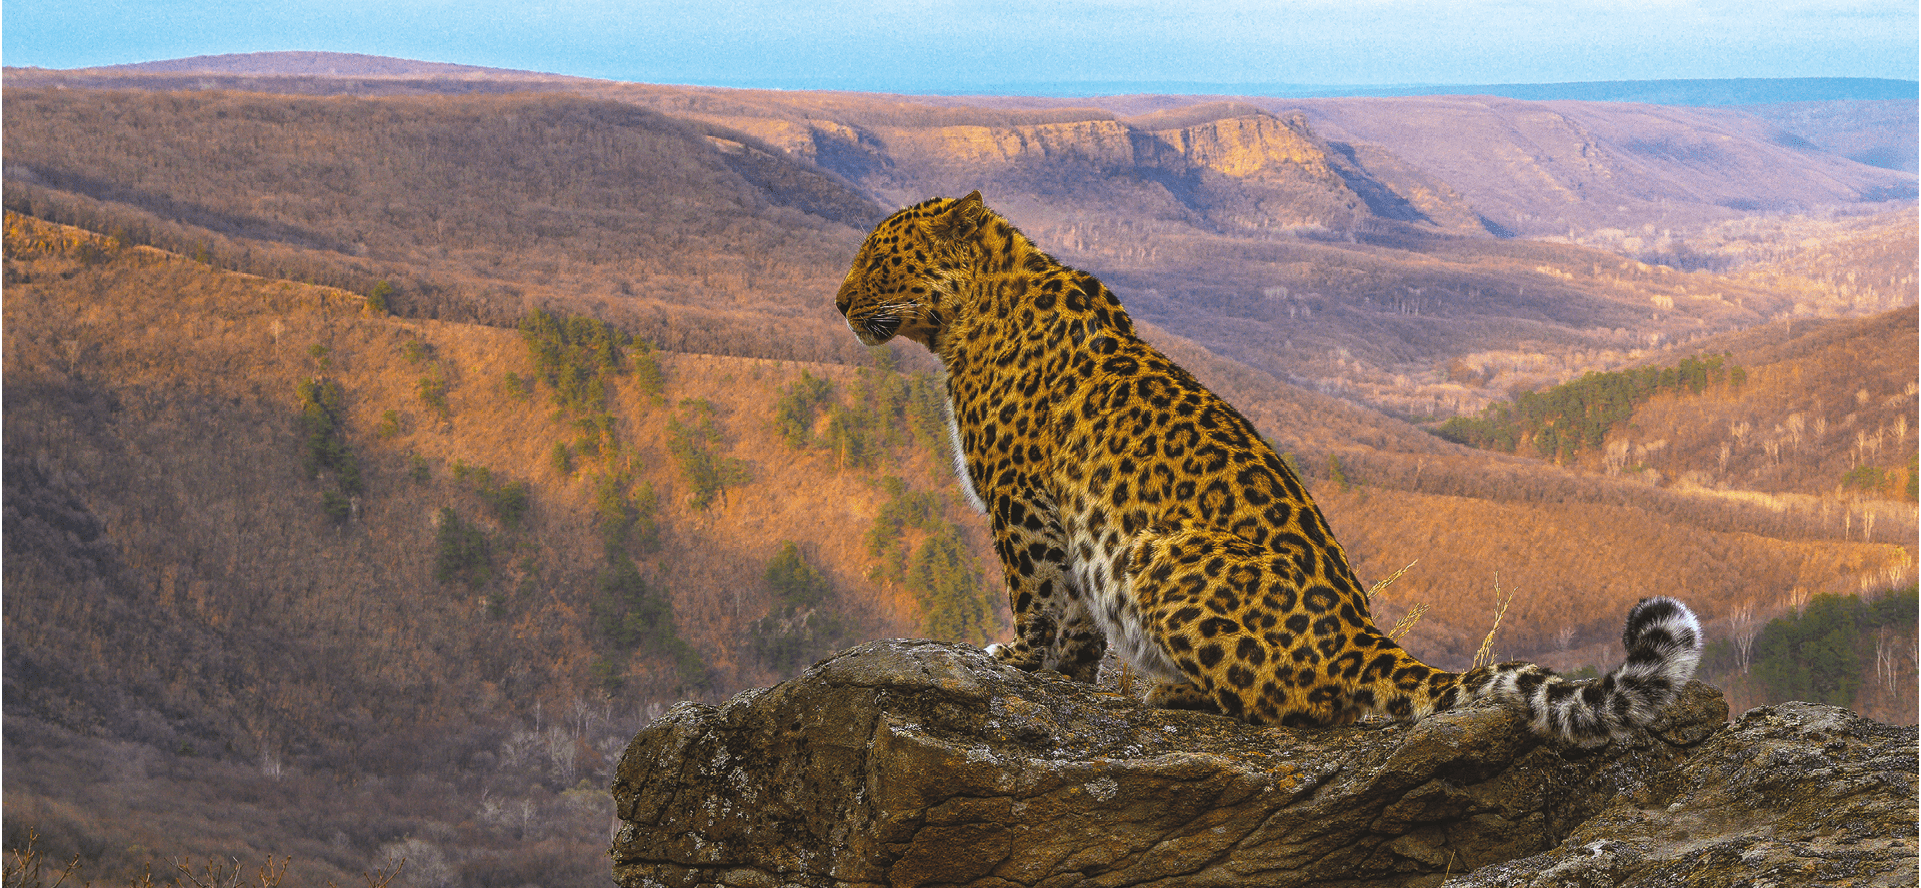 National Park Land of the Leopard